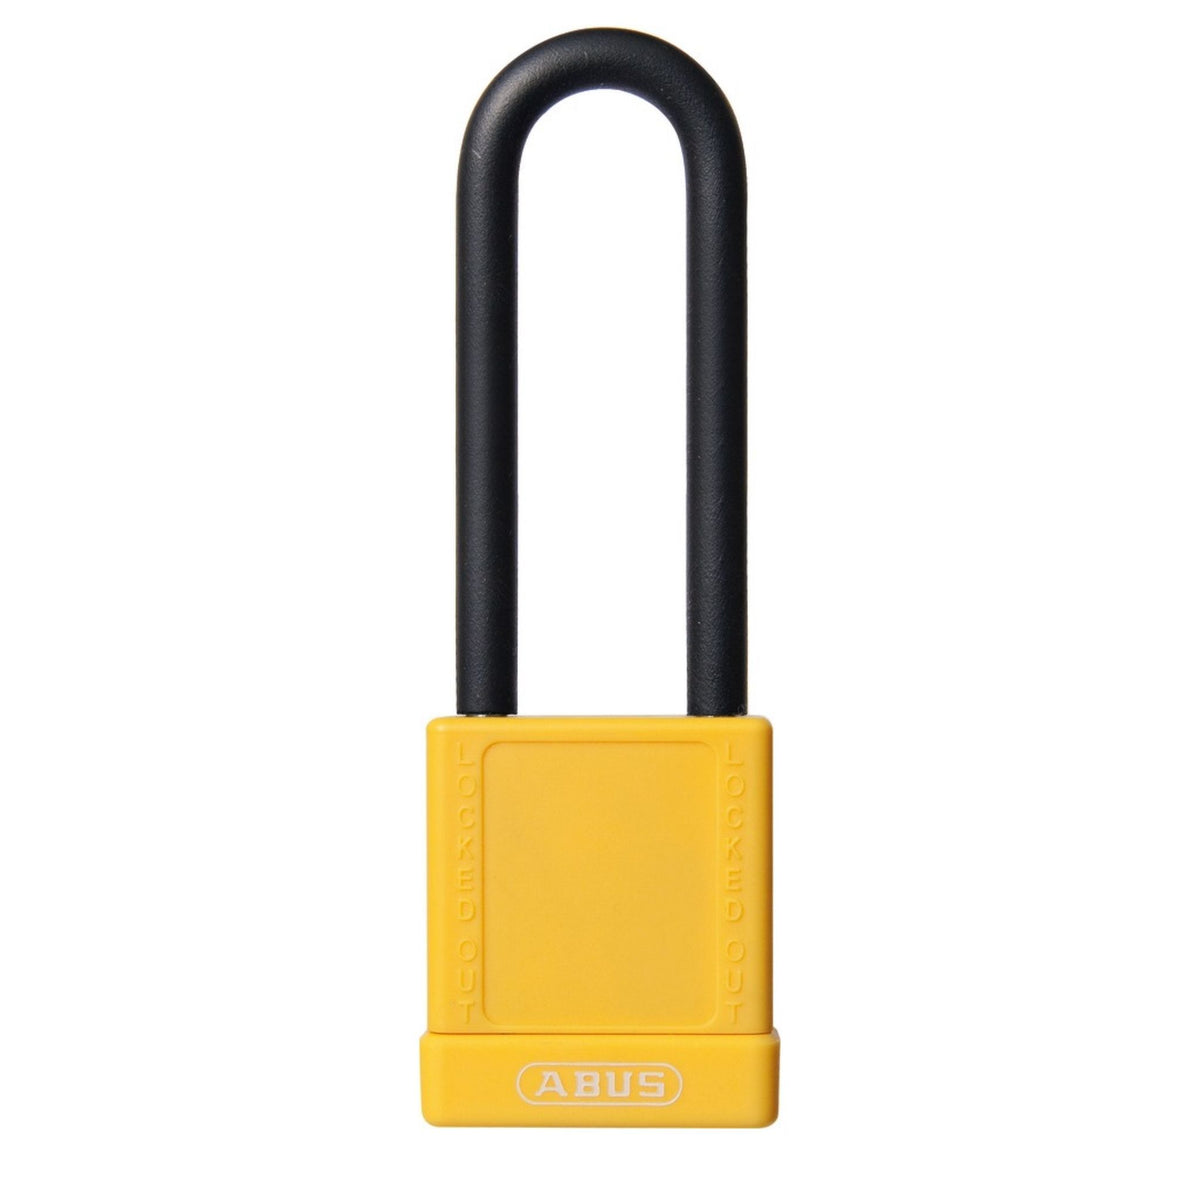 Abus 74/40HB75 MK Yellow Safety Padlock, 3&quot; Shackle - The Lock Source